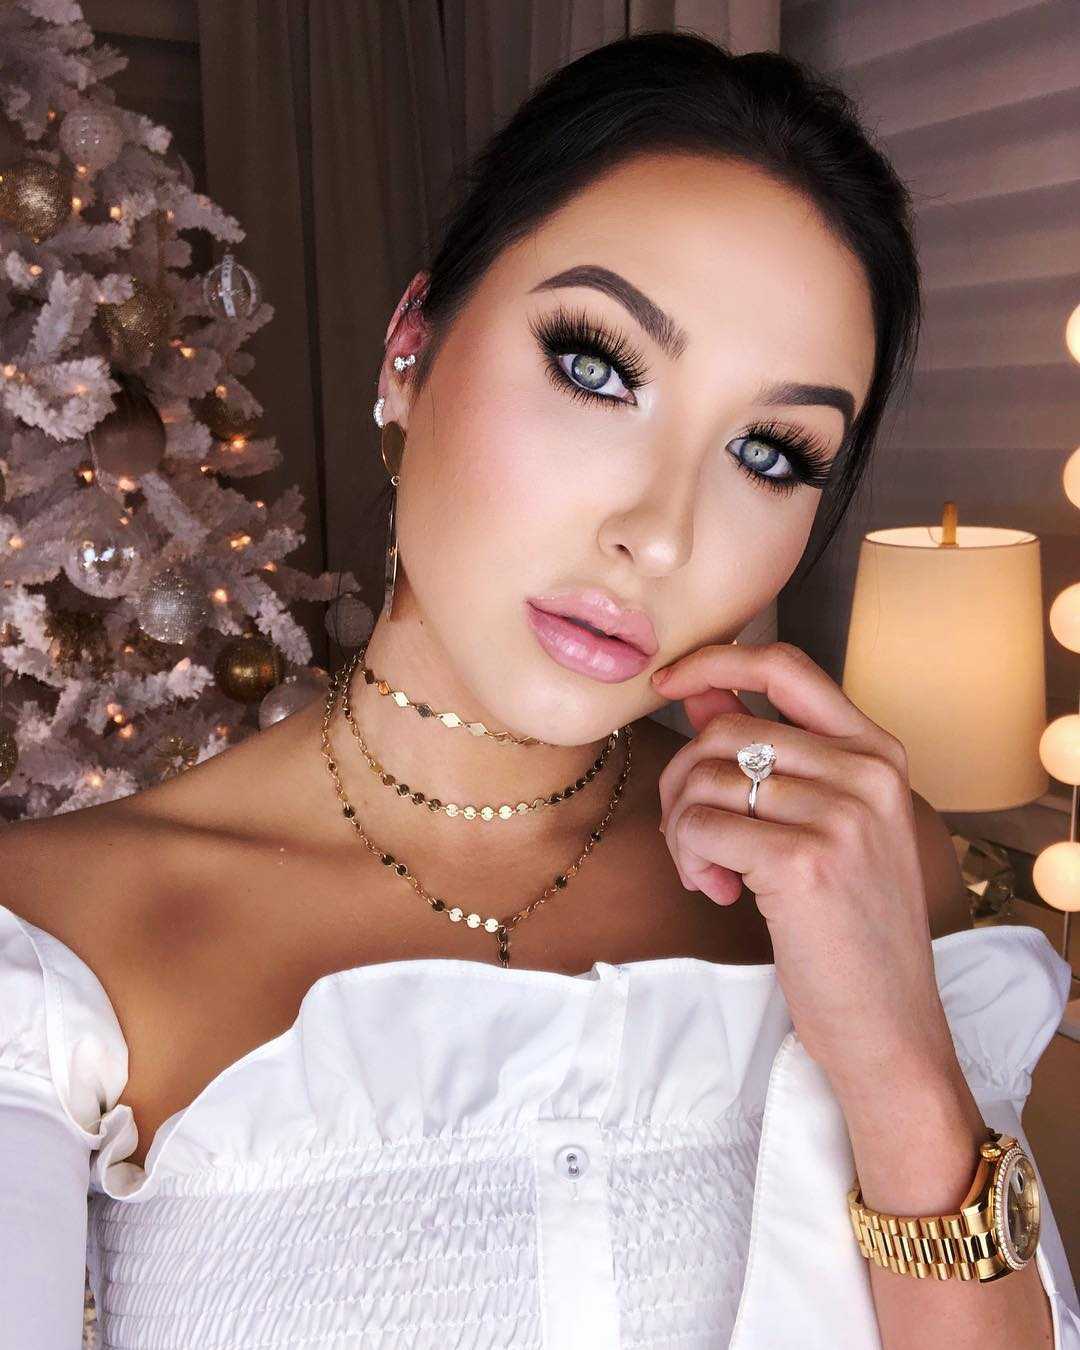 51 Sexy Jaclyn Hill Boobs Pictures Will Induce Passionate Feelings for Her 153